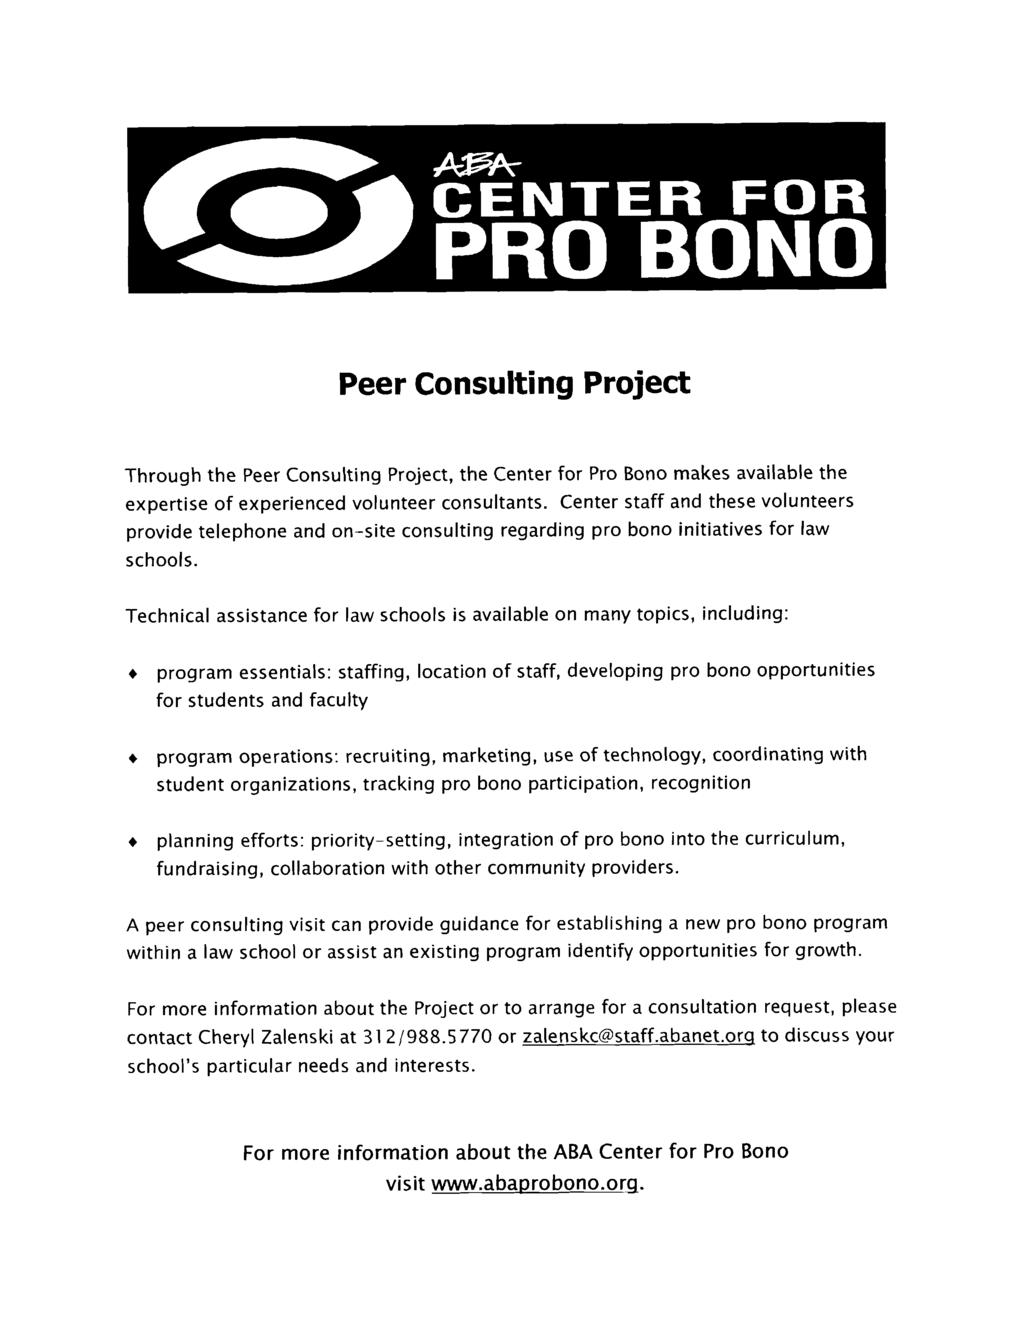 Peer Consulting Project Through the Peer Consulting Project, the Center for Pro Bono makes available the expertise of experienced volunteer consultants.